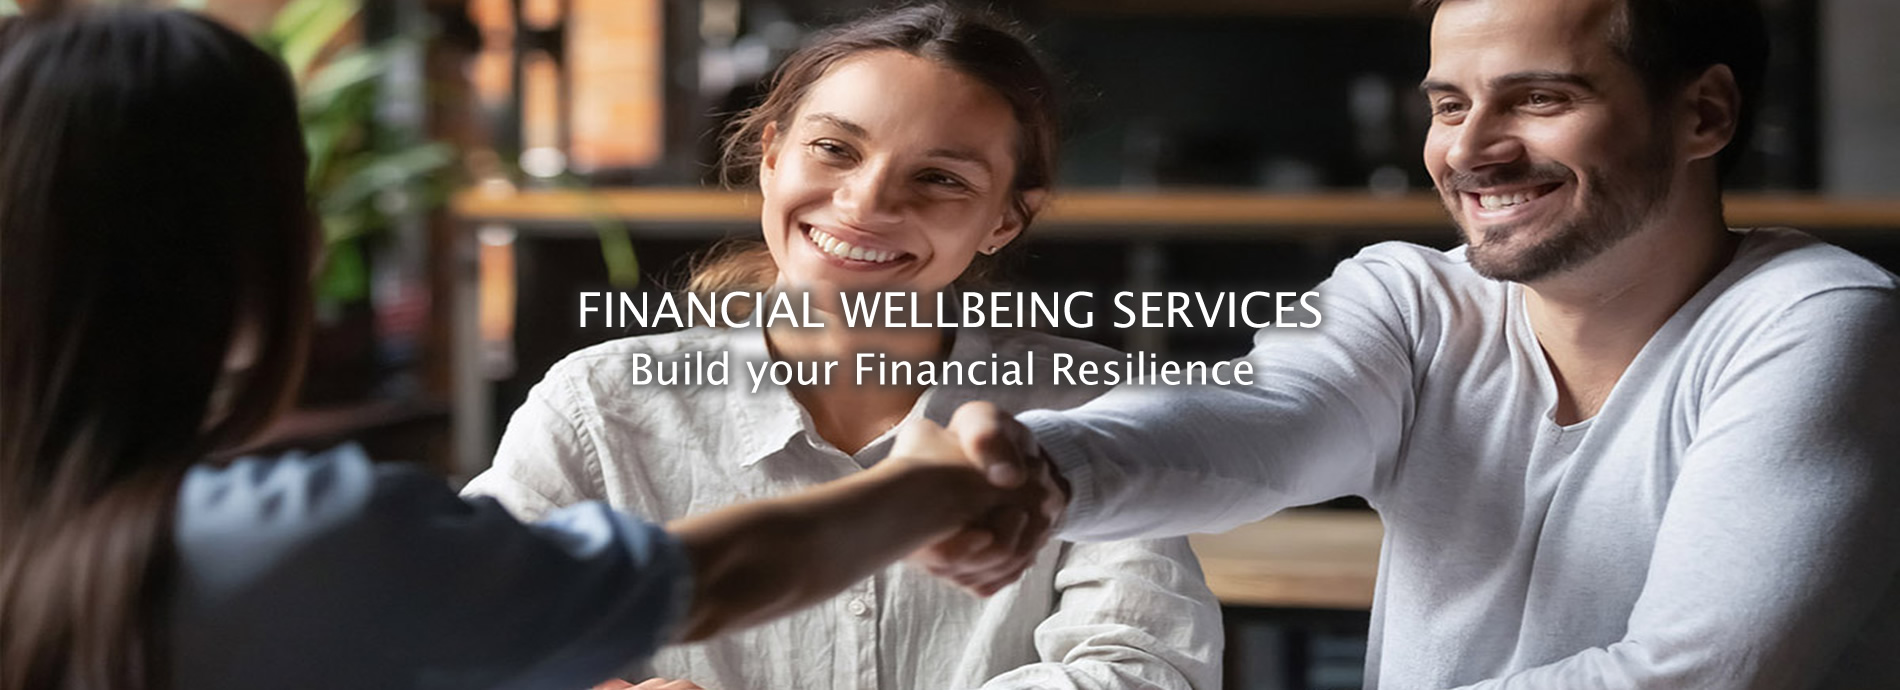 Financial Wellbeing Service